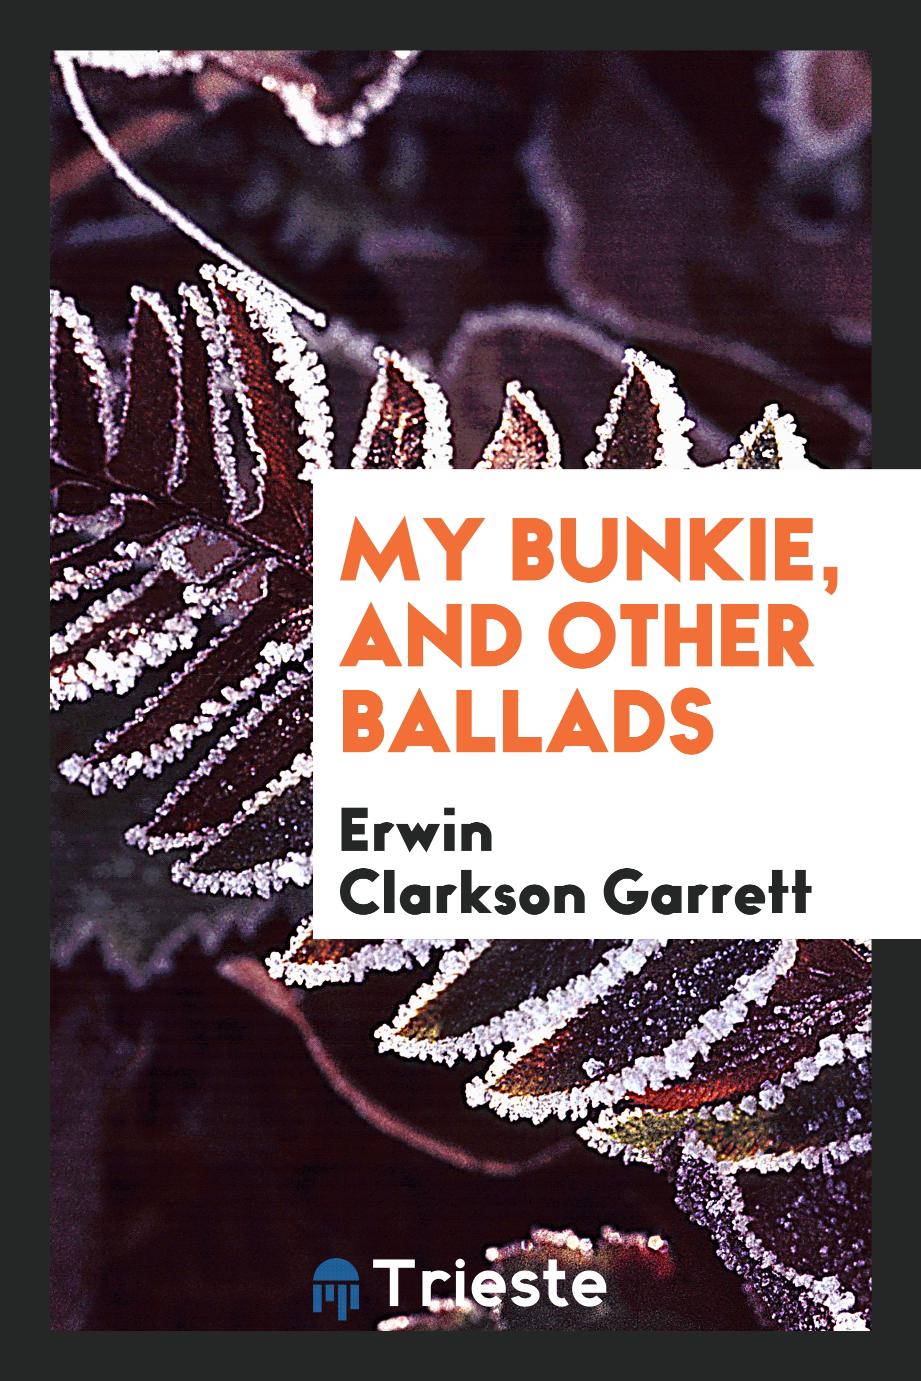 My Bunkie, and Other Ballads